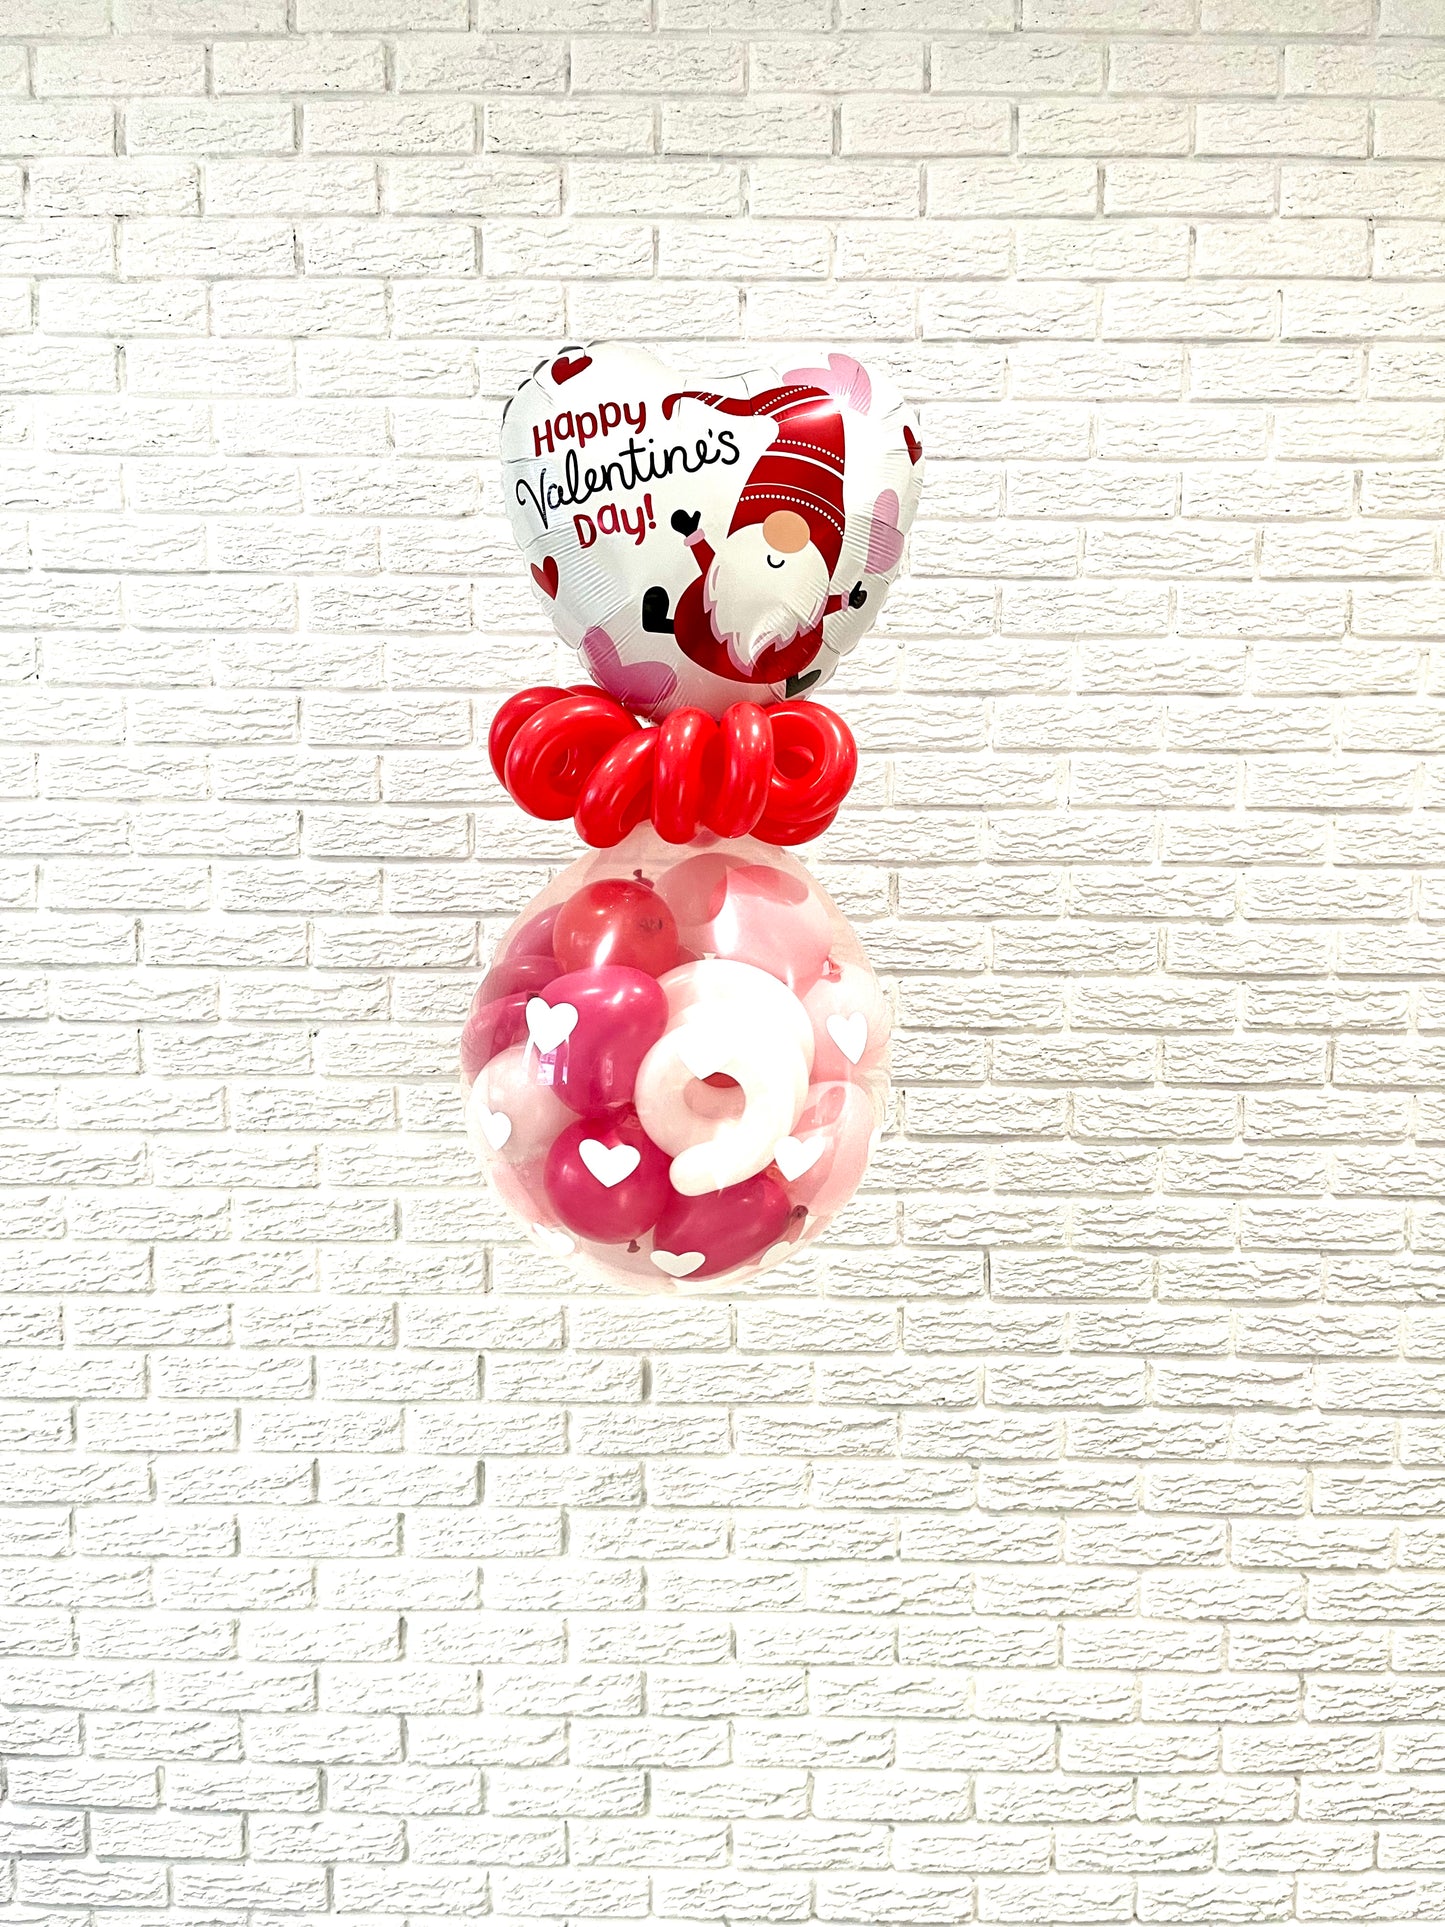 Valentine’s Day pop drop ready and white heart balloons from Balloon Babes 